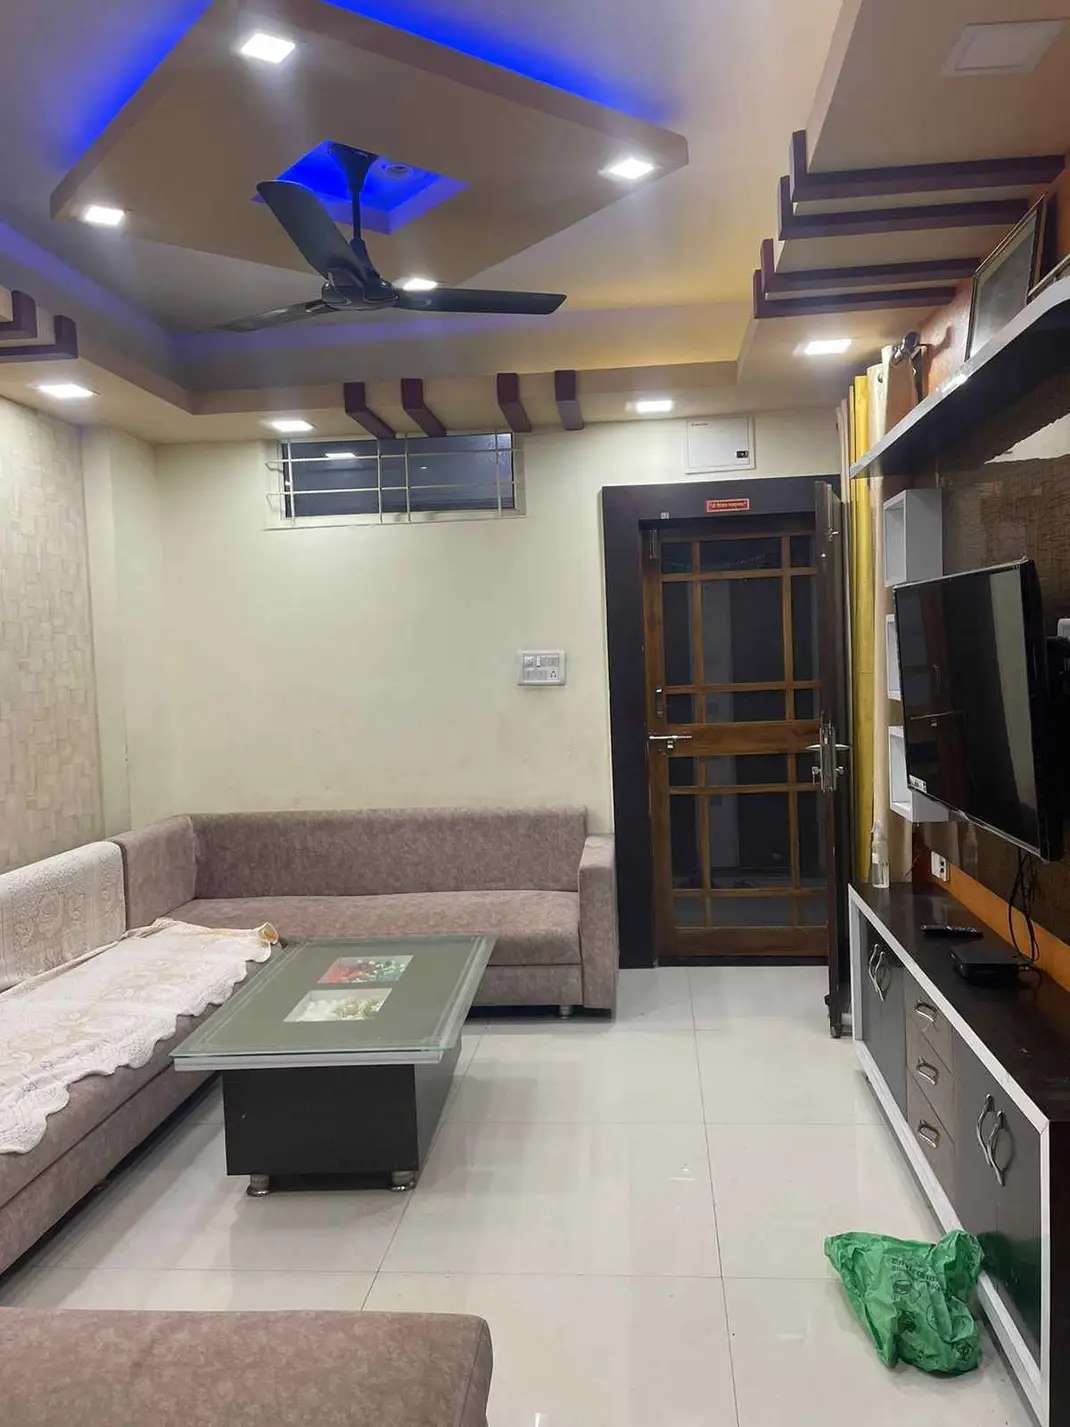 3 Bed/ 2 Bath Rent Apartment/ Flat; 1,500 sq. ft. carpet area, Furnished for rent @Ayodhya bypass road Bhopal